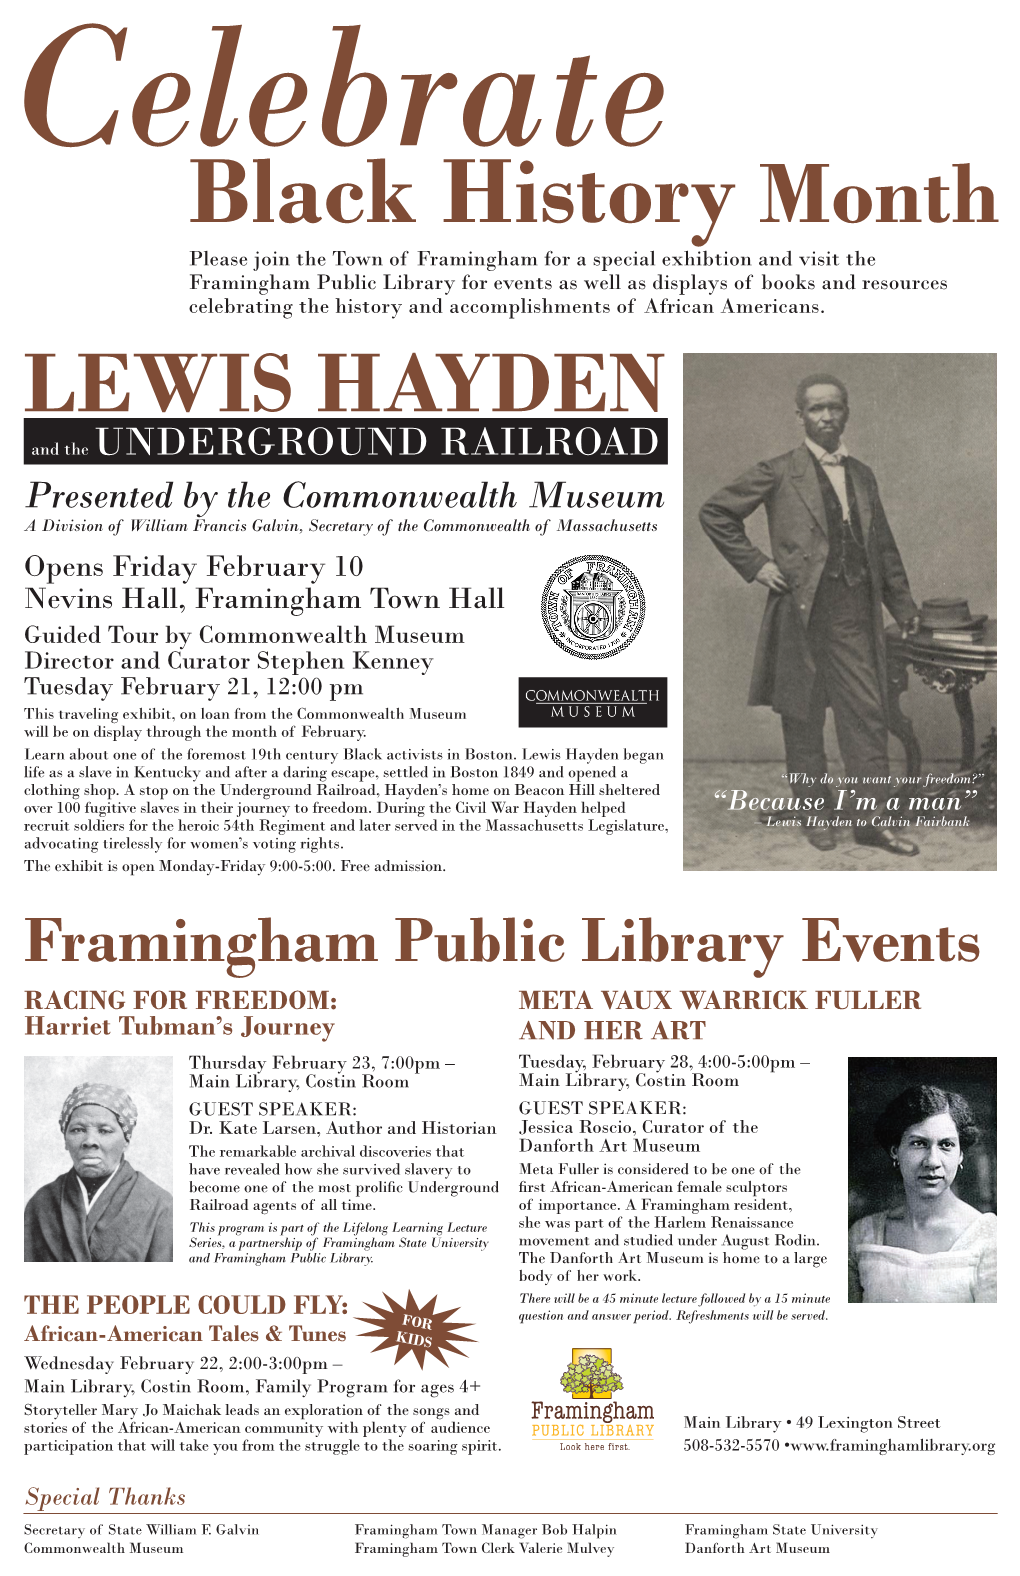 Framingham Public Library Events Presented by the Commonwealth